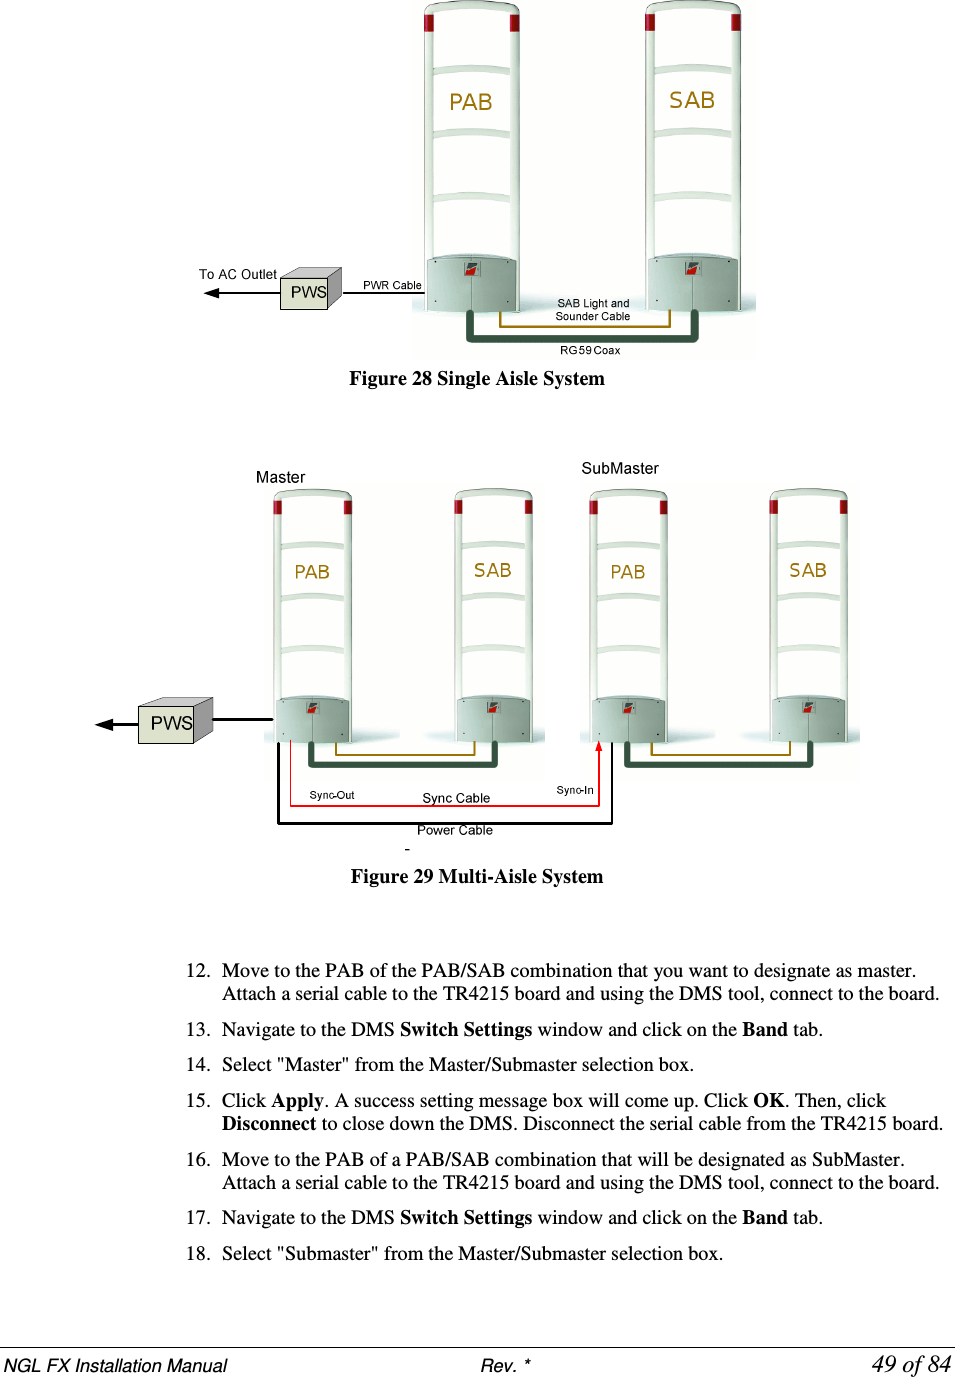 NGL FX Installation Manual                           Rev. *            49 of 84  Figure 28 Single Aisle System    Figure 29 Multi-Aisle System   12. Move to the PAB of the PAB/SAB combination that you want to designate as master. Attach a serial cable to the TR4215 board and using the DMS tool, connect to the board. 13. Navigate to the DMS Switch Settings window and click on the Band tab.  14. Select &quot;Master&quot; from the Master/Submaster selection box. 15. Click Apply. A success setting message box will come up. Click OK. Then, click Disconnect to close down the DMS. Disconnect the serial cable from the TR4215 board. 16. Move to the PAB of a PAB/SAB combination that will be designated as SubMaster. Attach a serial cable to the TR4215 board and using the DMS tool, connect to the board. 17. Navigate to the DMS Switch Settings window and click on the Band tab.  18. Select &quot;Submaster&quot; from the Master/Submaster selection box. 